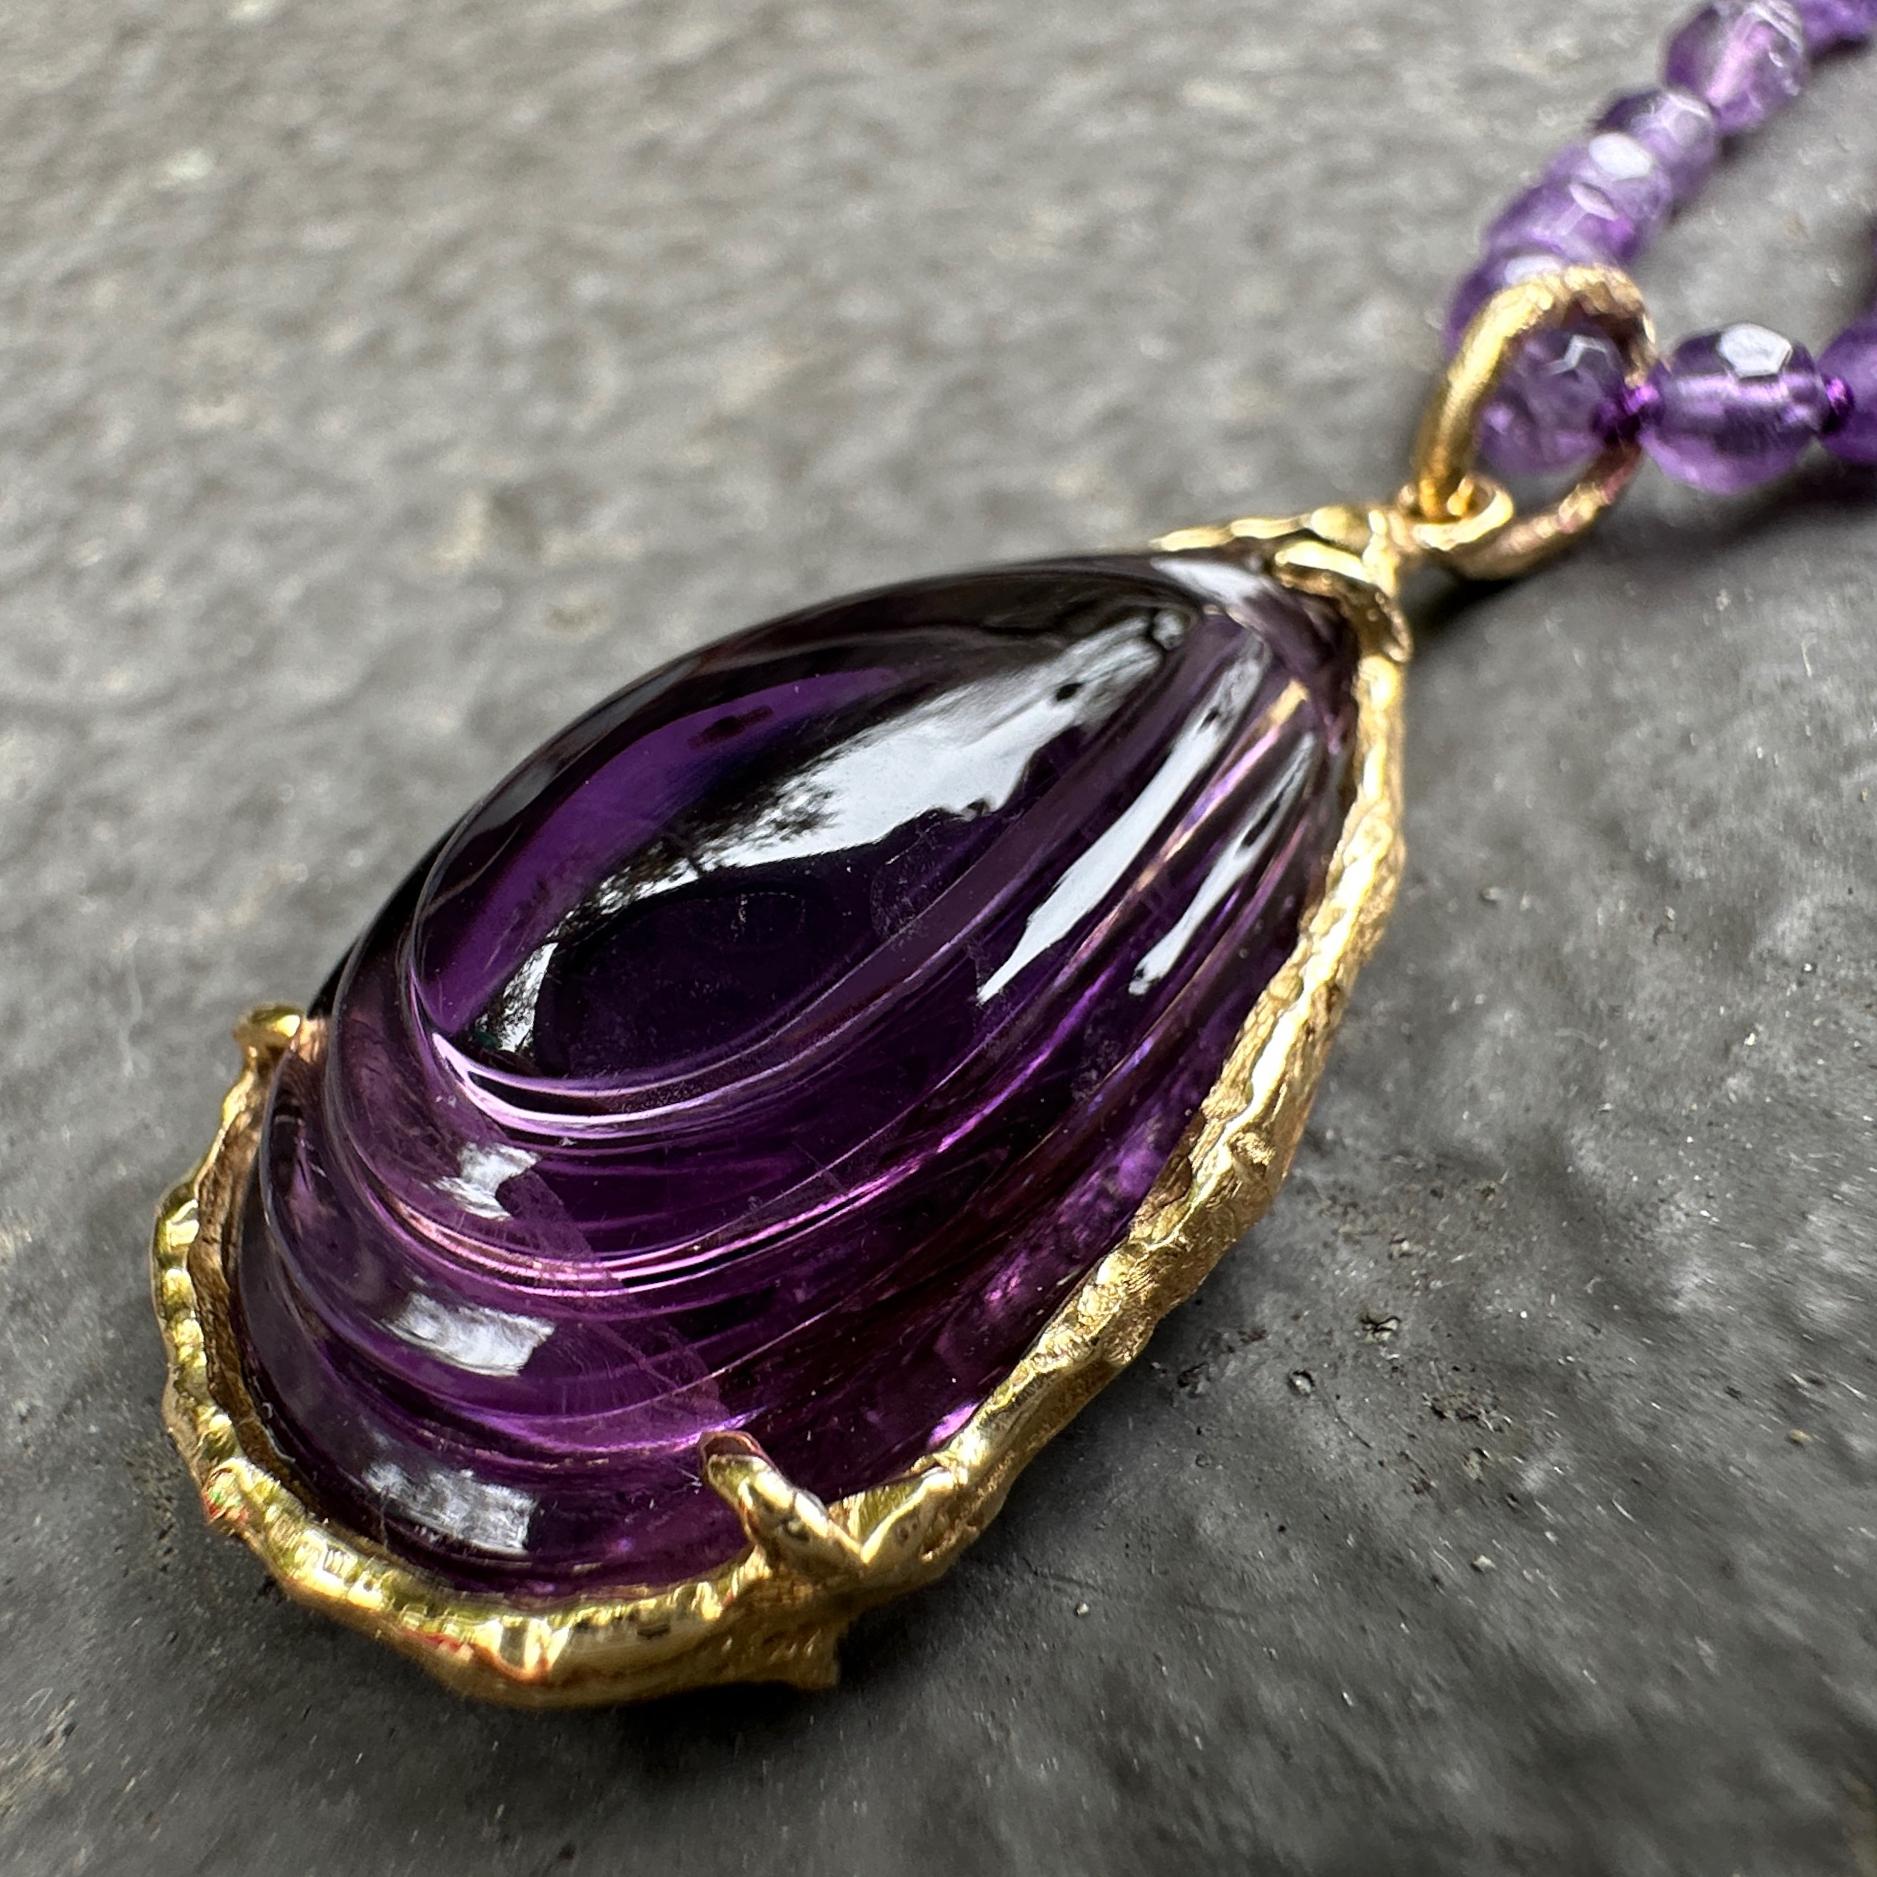 39 Carat Carved Amethyst Pendant in 18K Gold on Convertible Amethyst Bead Chain For Sale 3